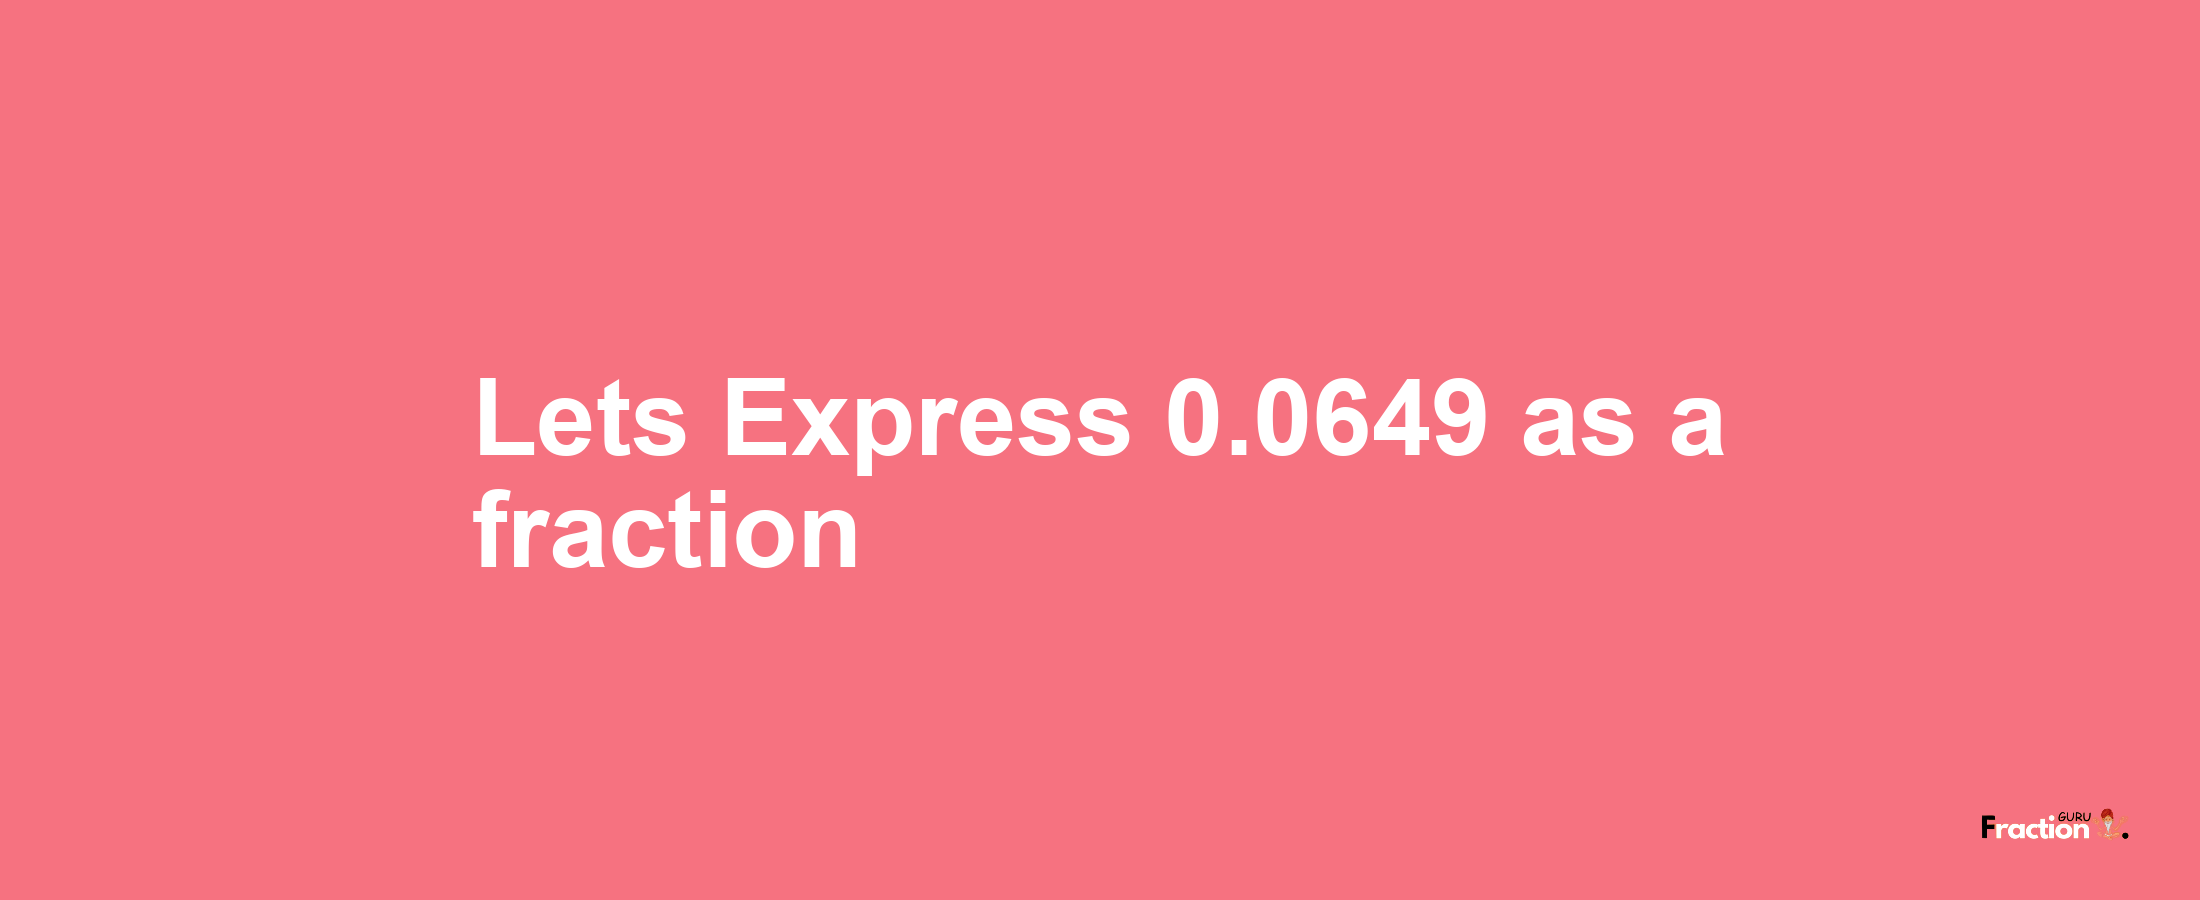 Lets Express 0.0649 as afraction